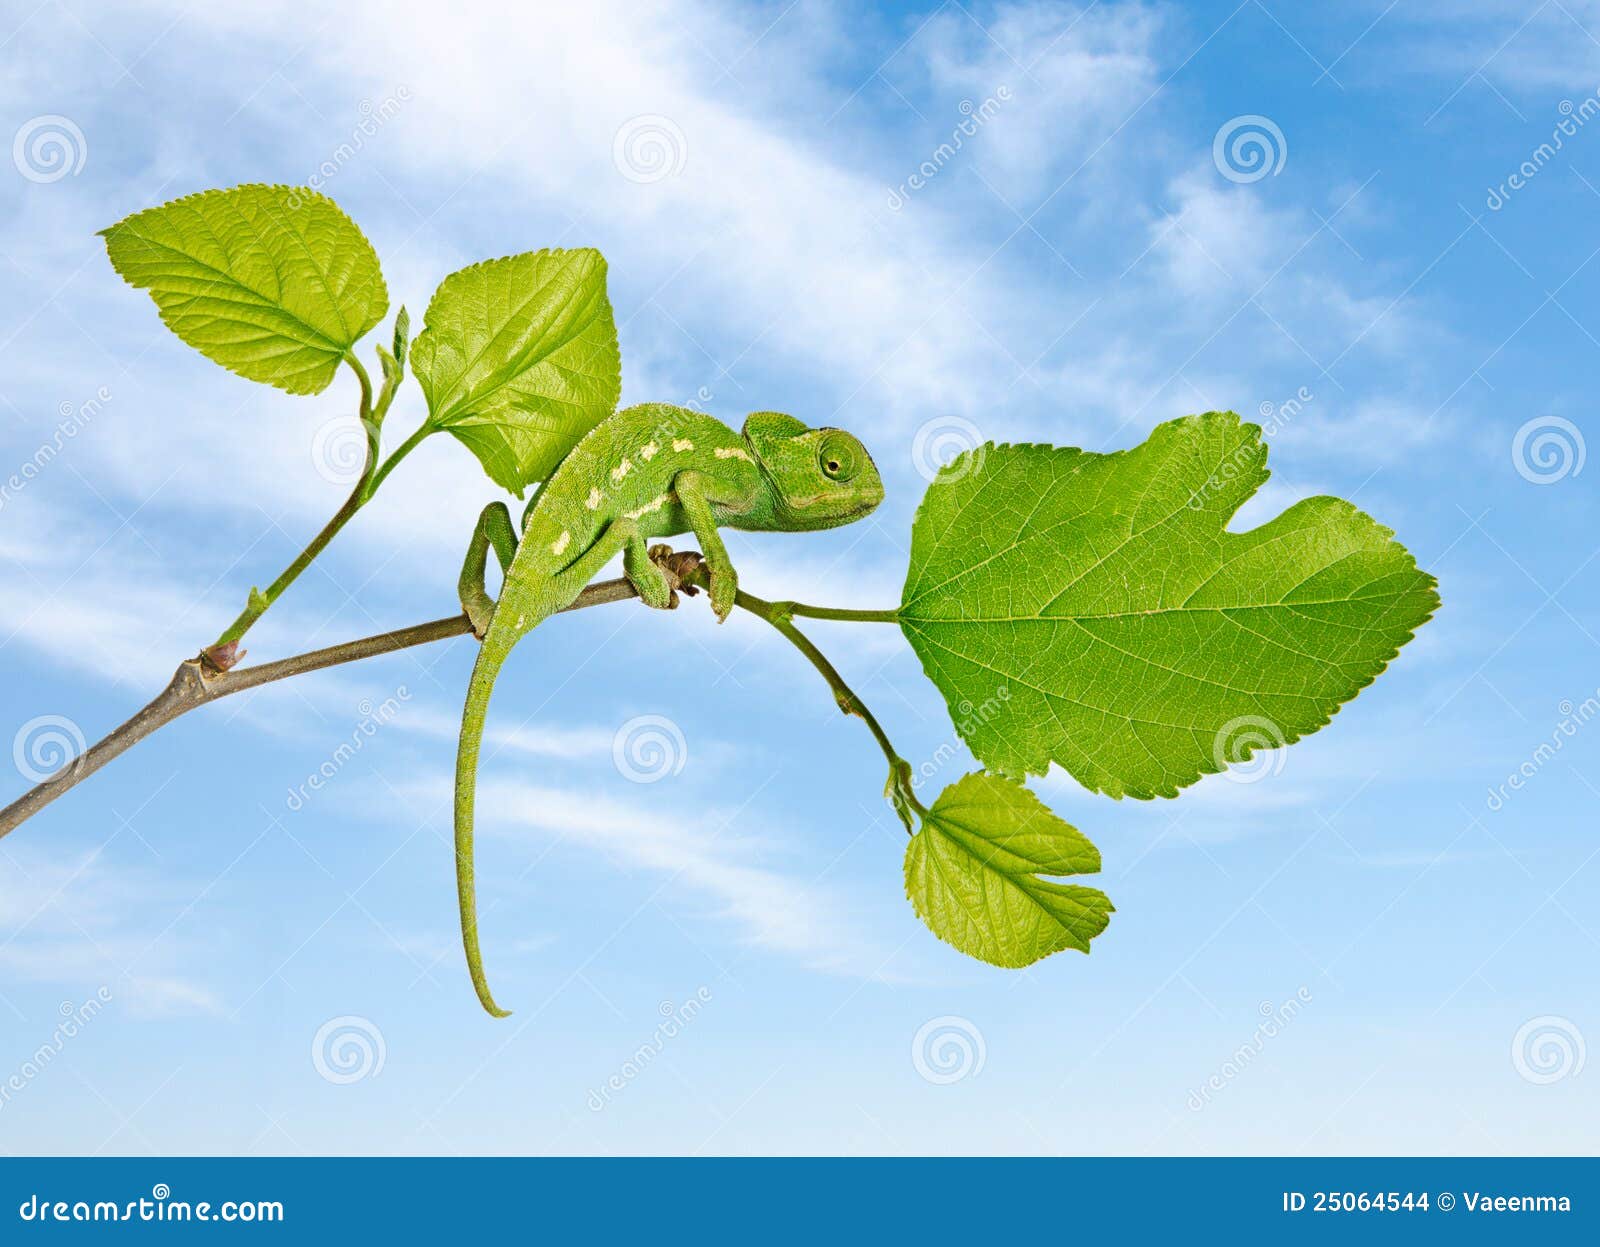 Chameleon on branch stock photo. Image of tropical ...